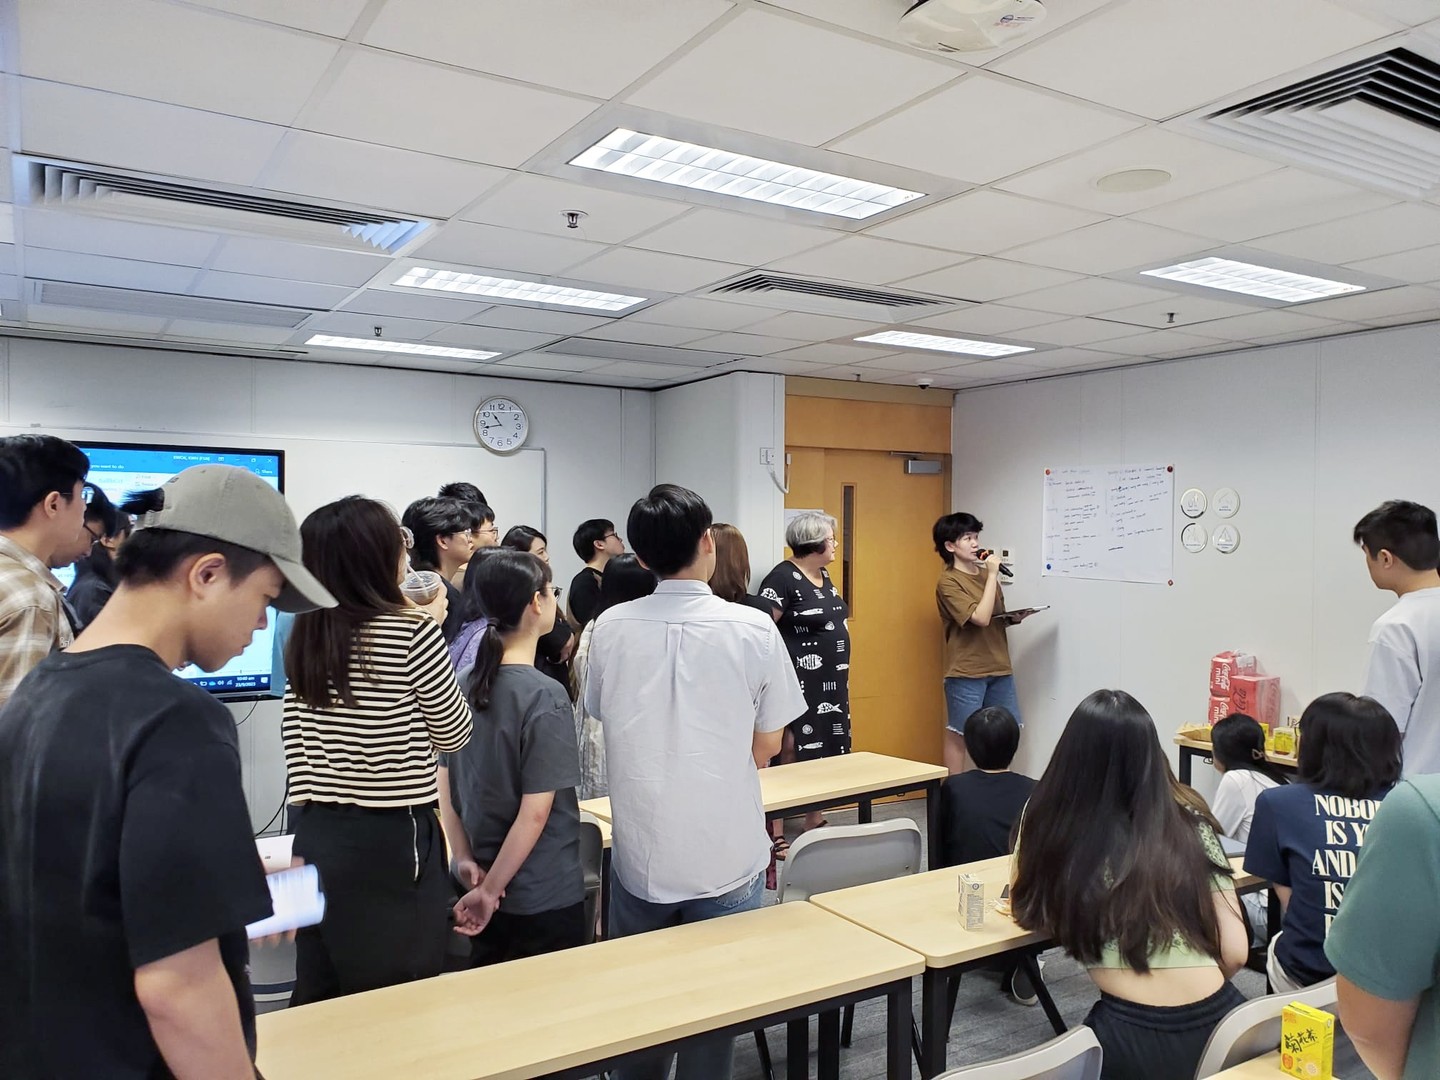 Clare Narrod standing with Hong Kong Polytechnic students, observing a presentation.